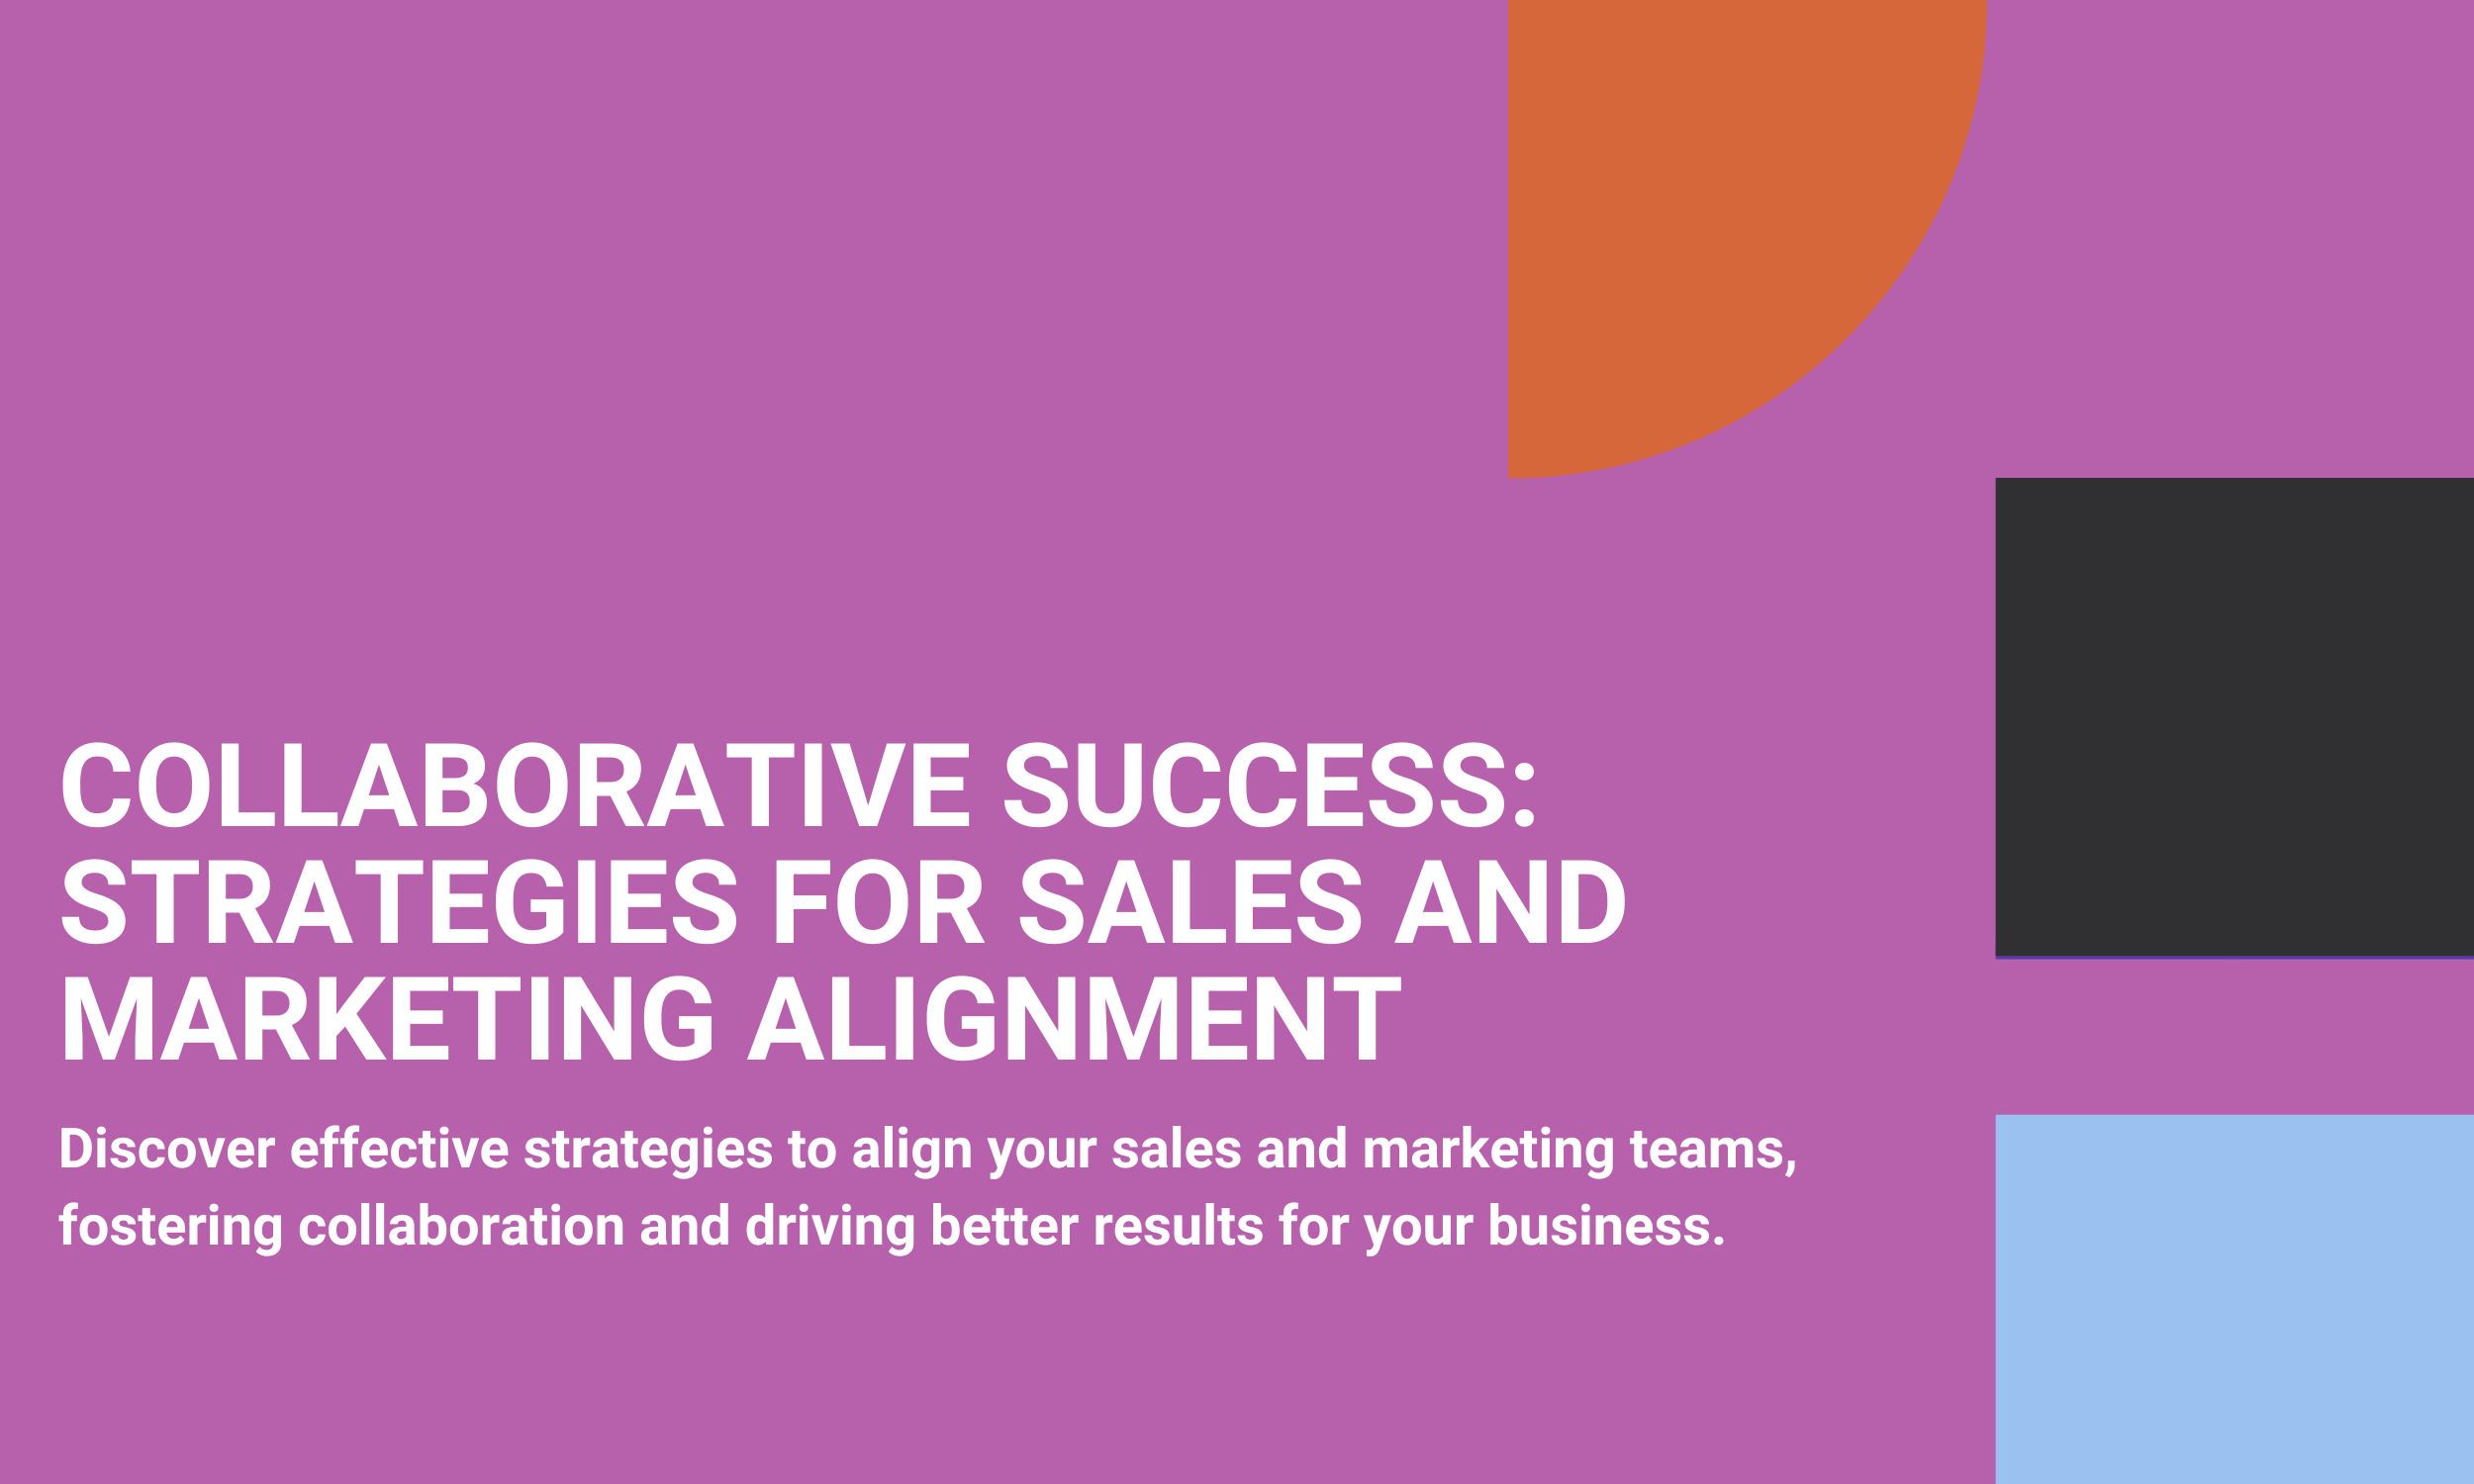 Collaborative Success: Strategies for Sales and Marketing Alignment